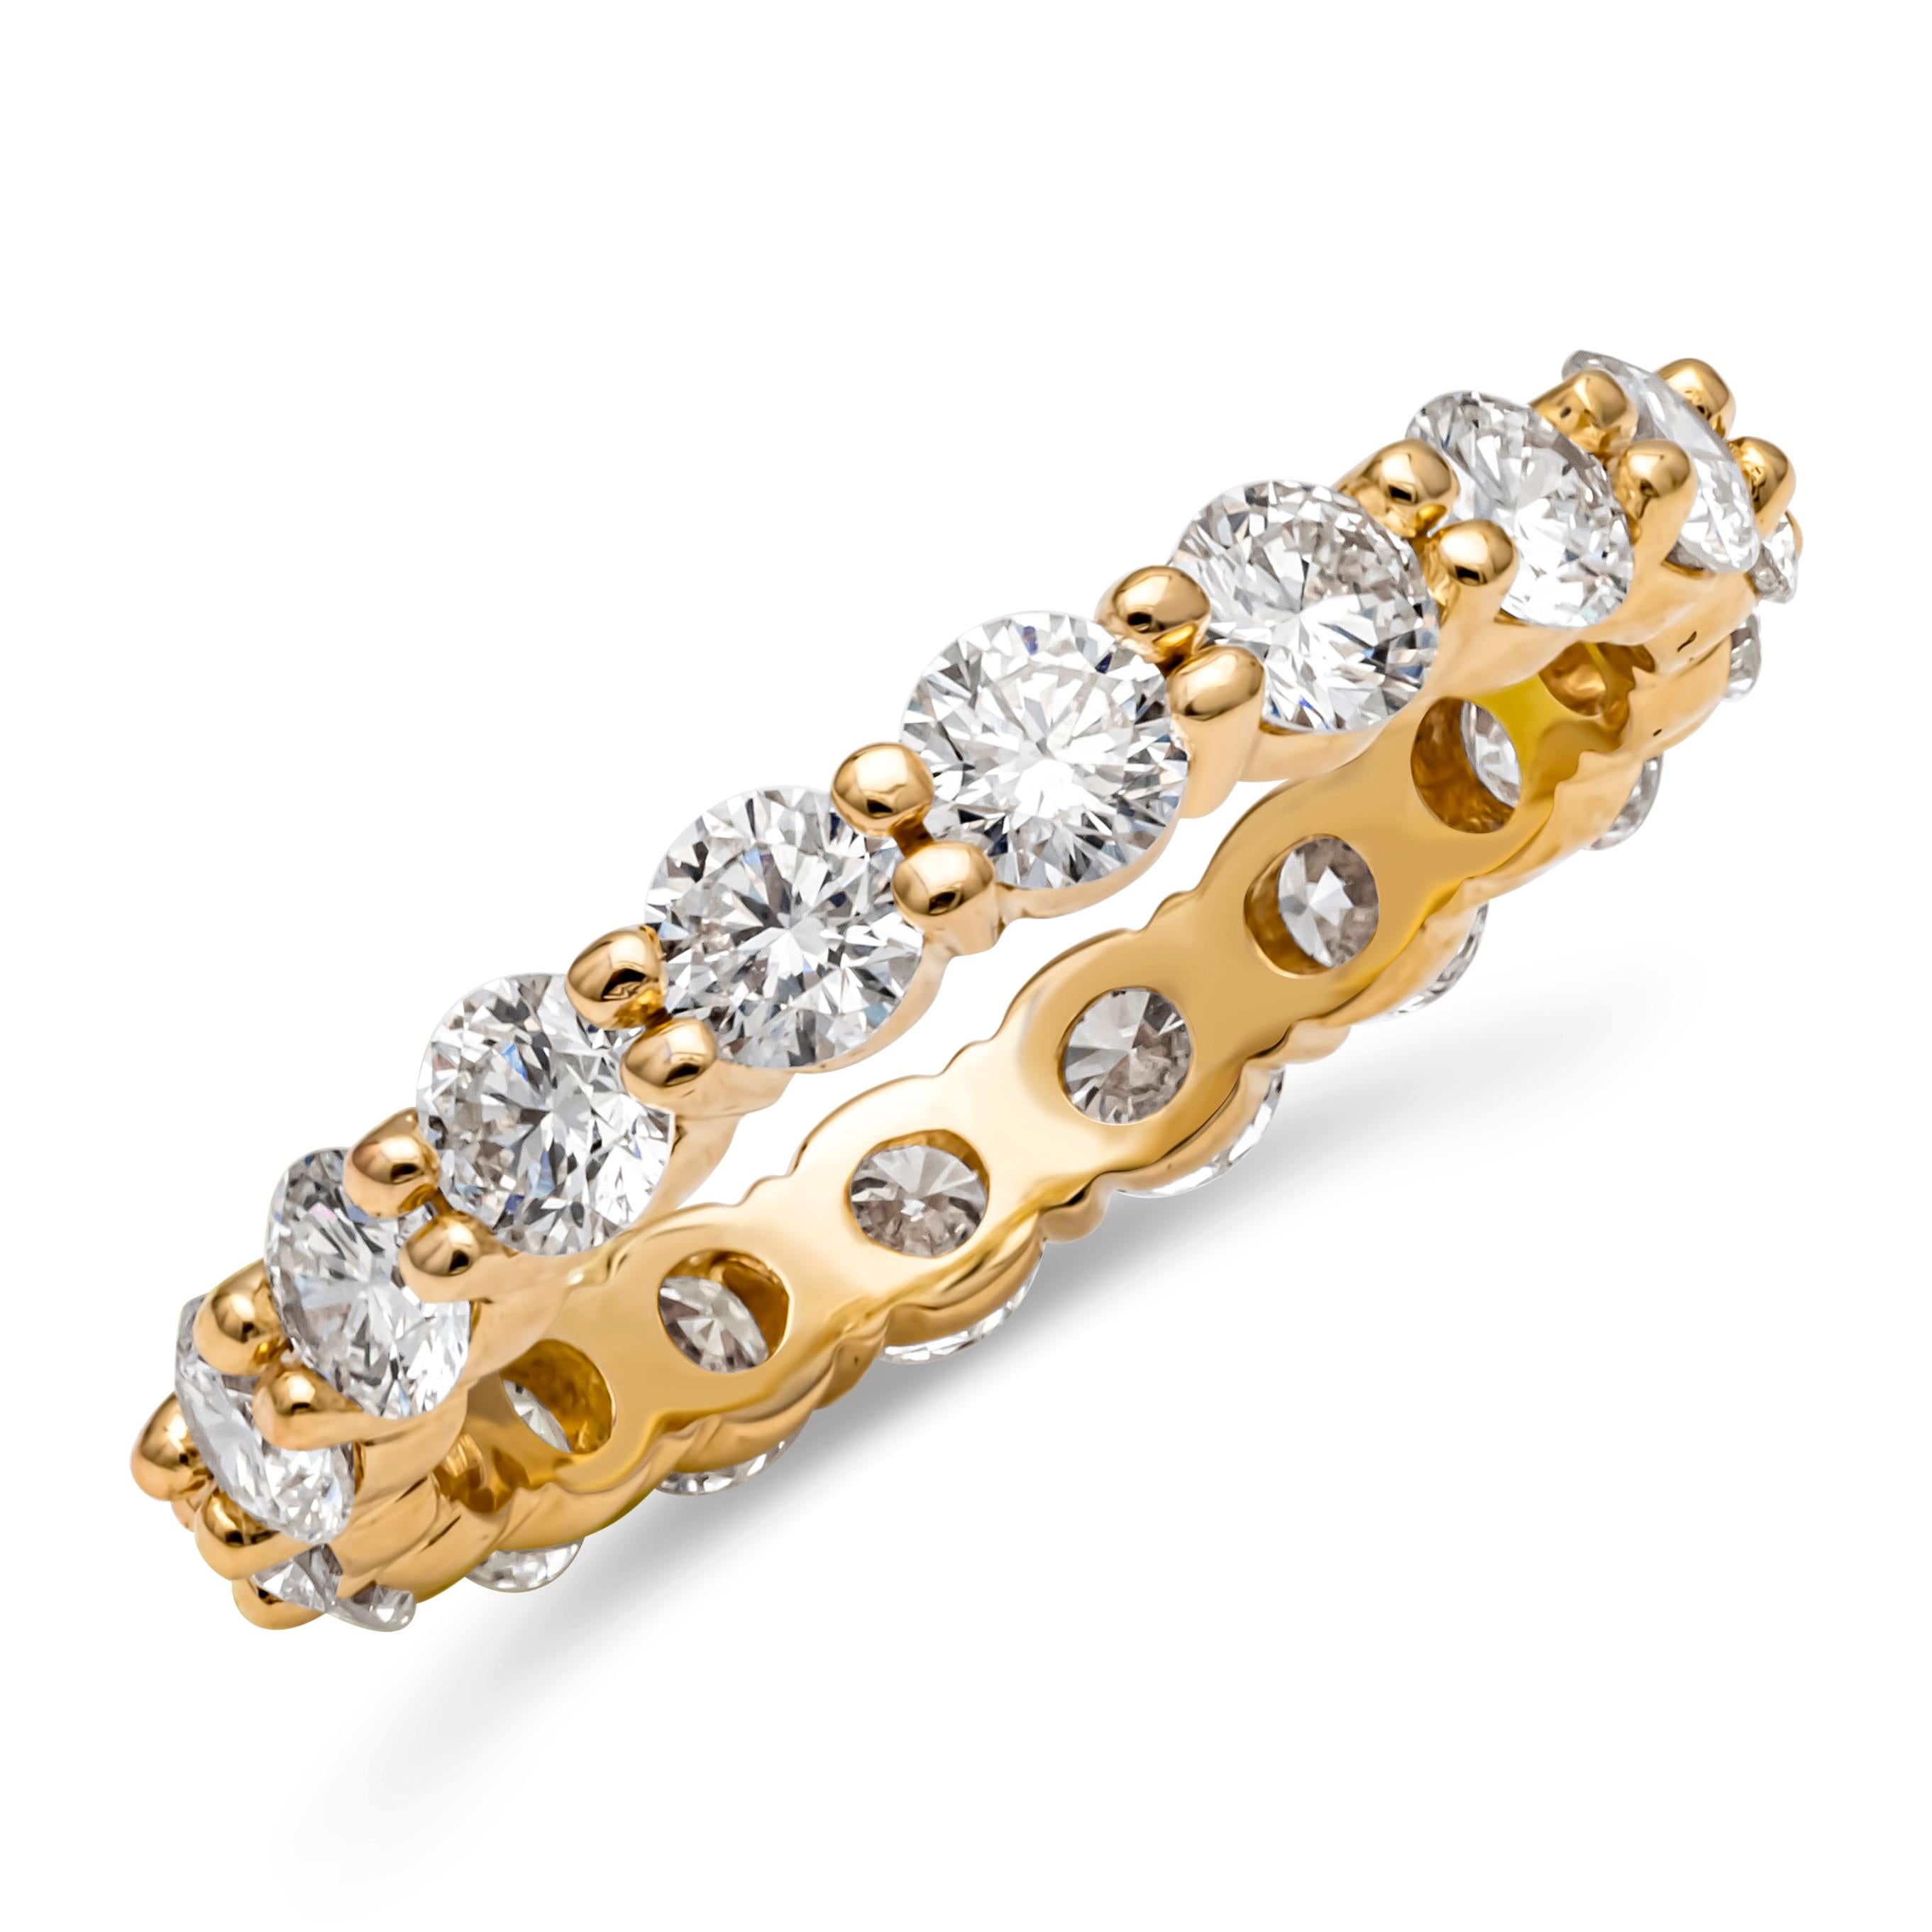 A classic eternity wedding band, showcasing a line of 18 round brilliant cut diamonds weighing 2.30 carats total with G color and VS clarity. Set on a timeless shared prong basket setting and finely made with 14K yellow gold. Size 6.75 US, resizable